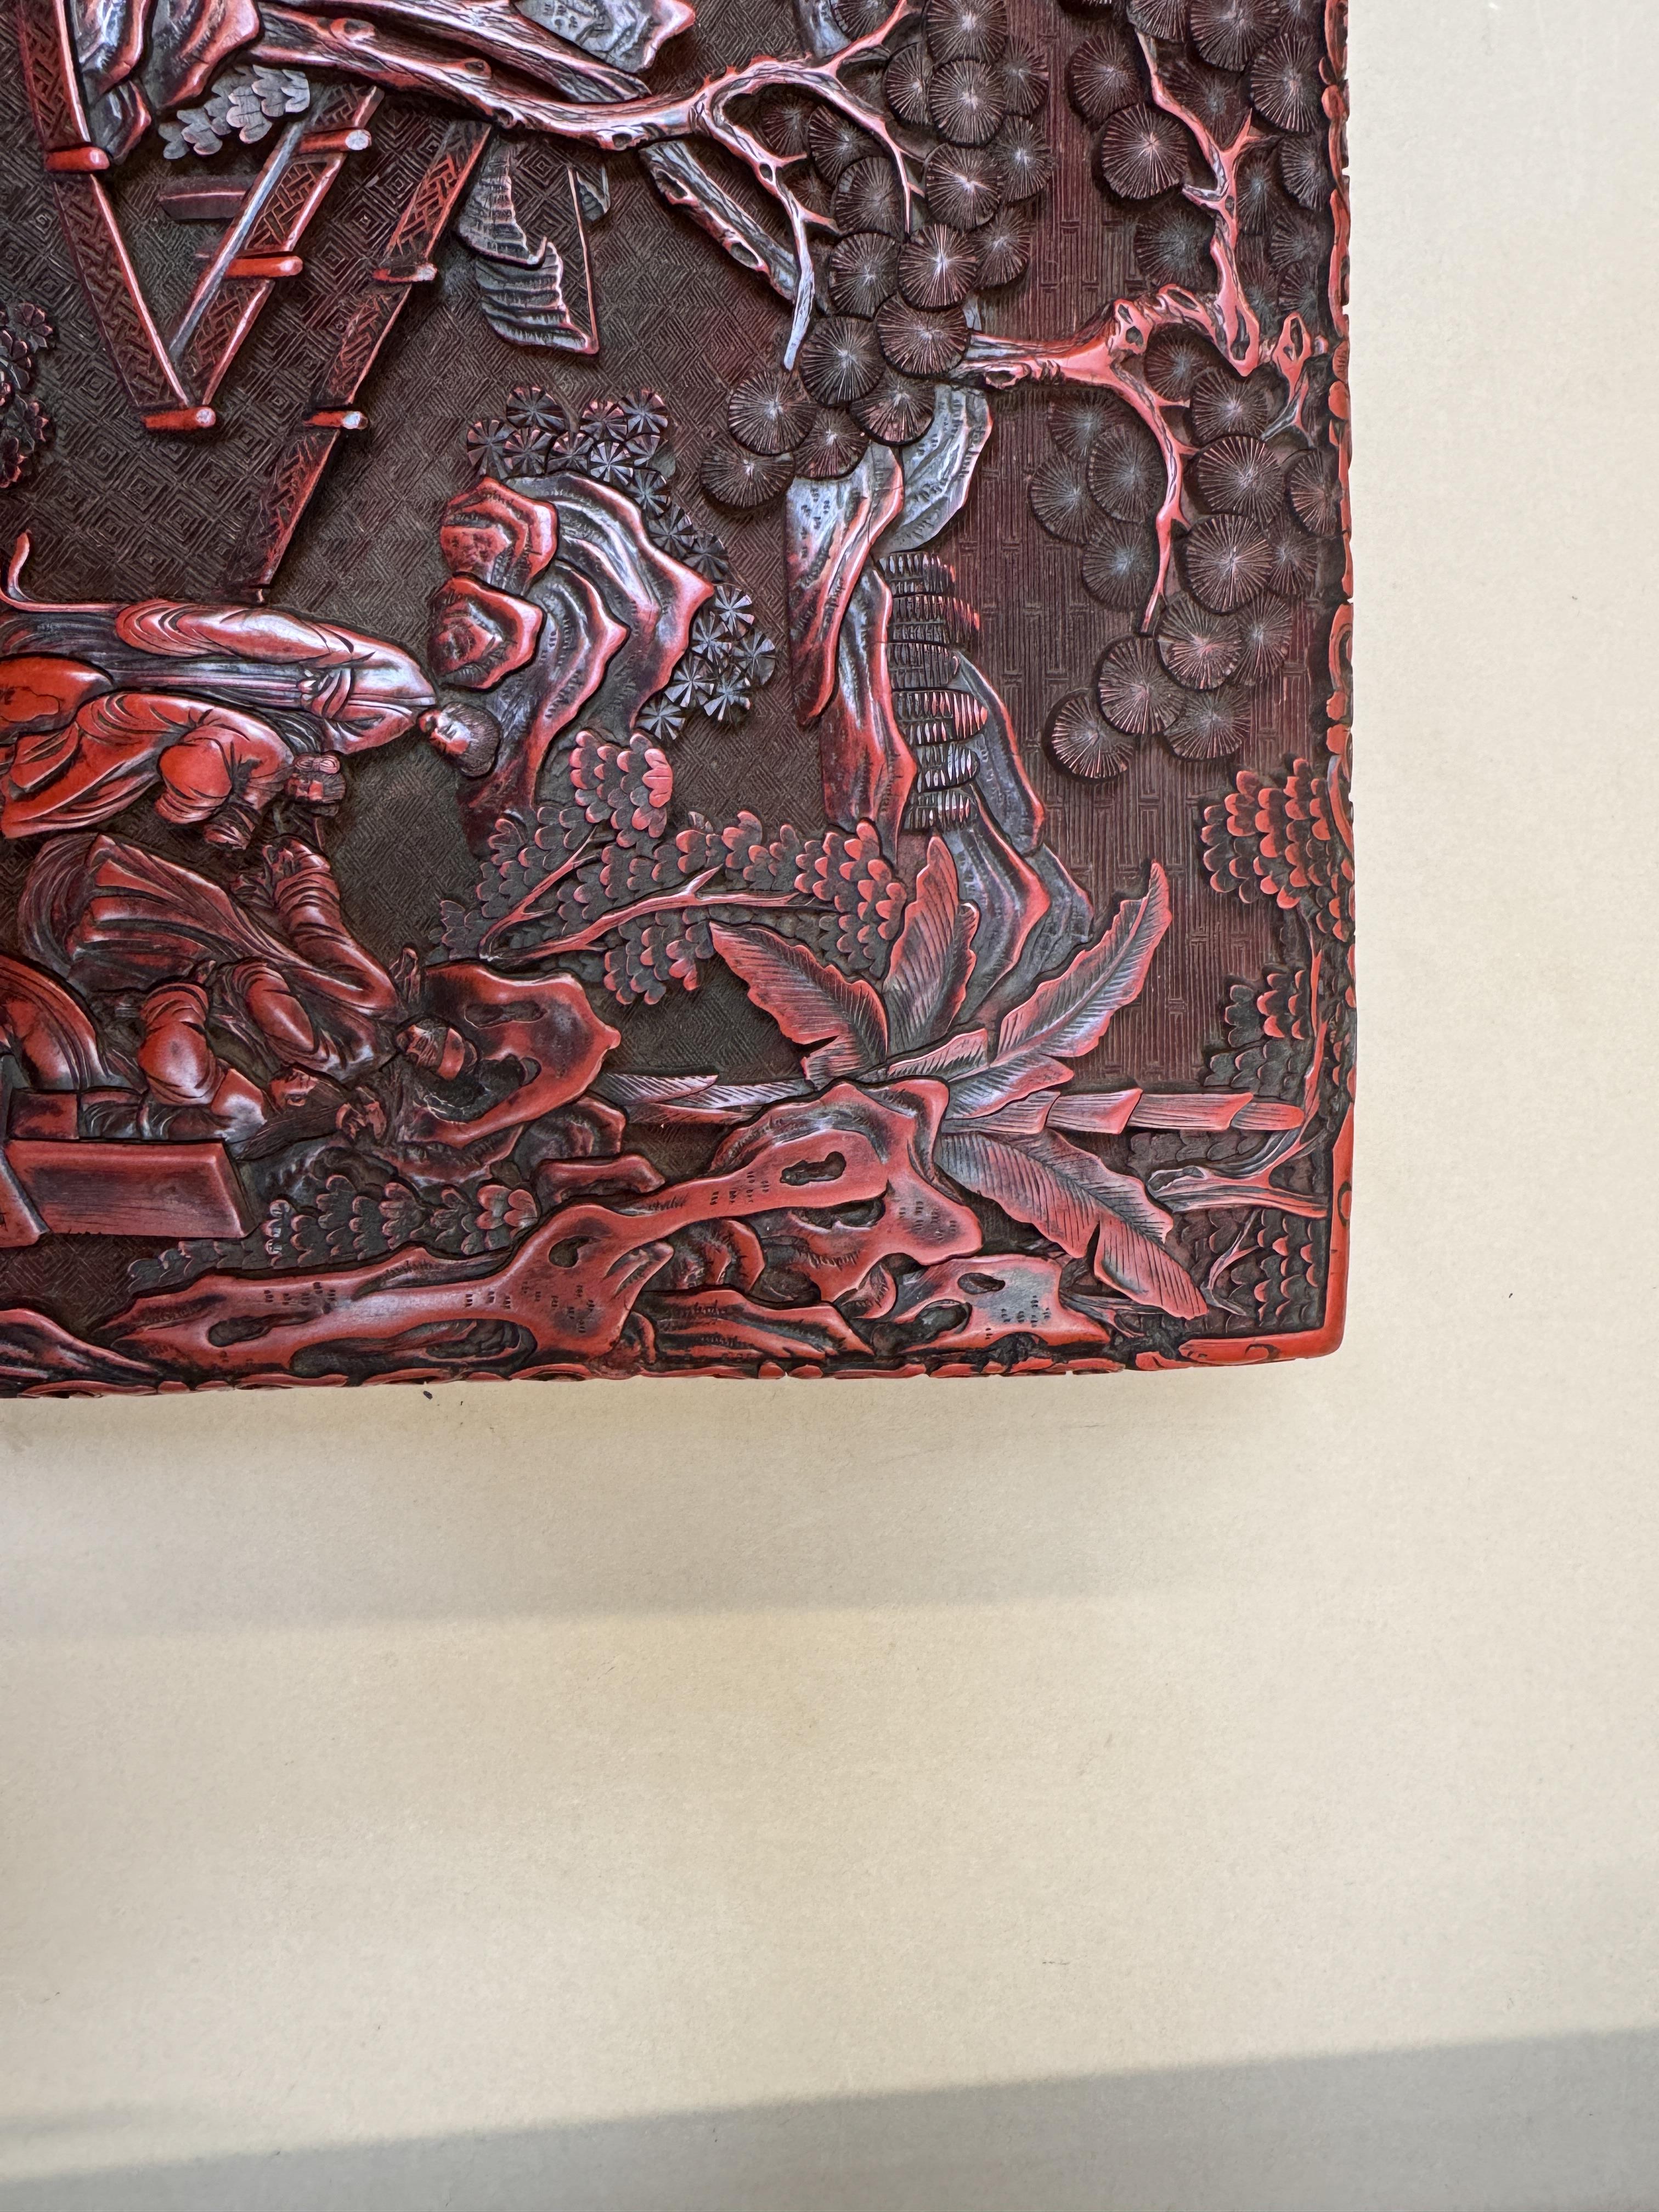 A LARGE AND FINE CHINESE CINNABAR LACQUER 'FIGURAL' BOX AND COVER 早十九世紀 剔紅人物故事圖紋方蓋盒 - Image 49 of 54